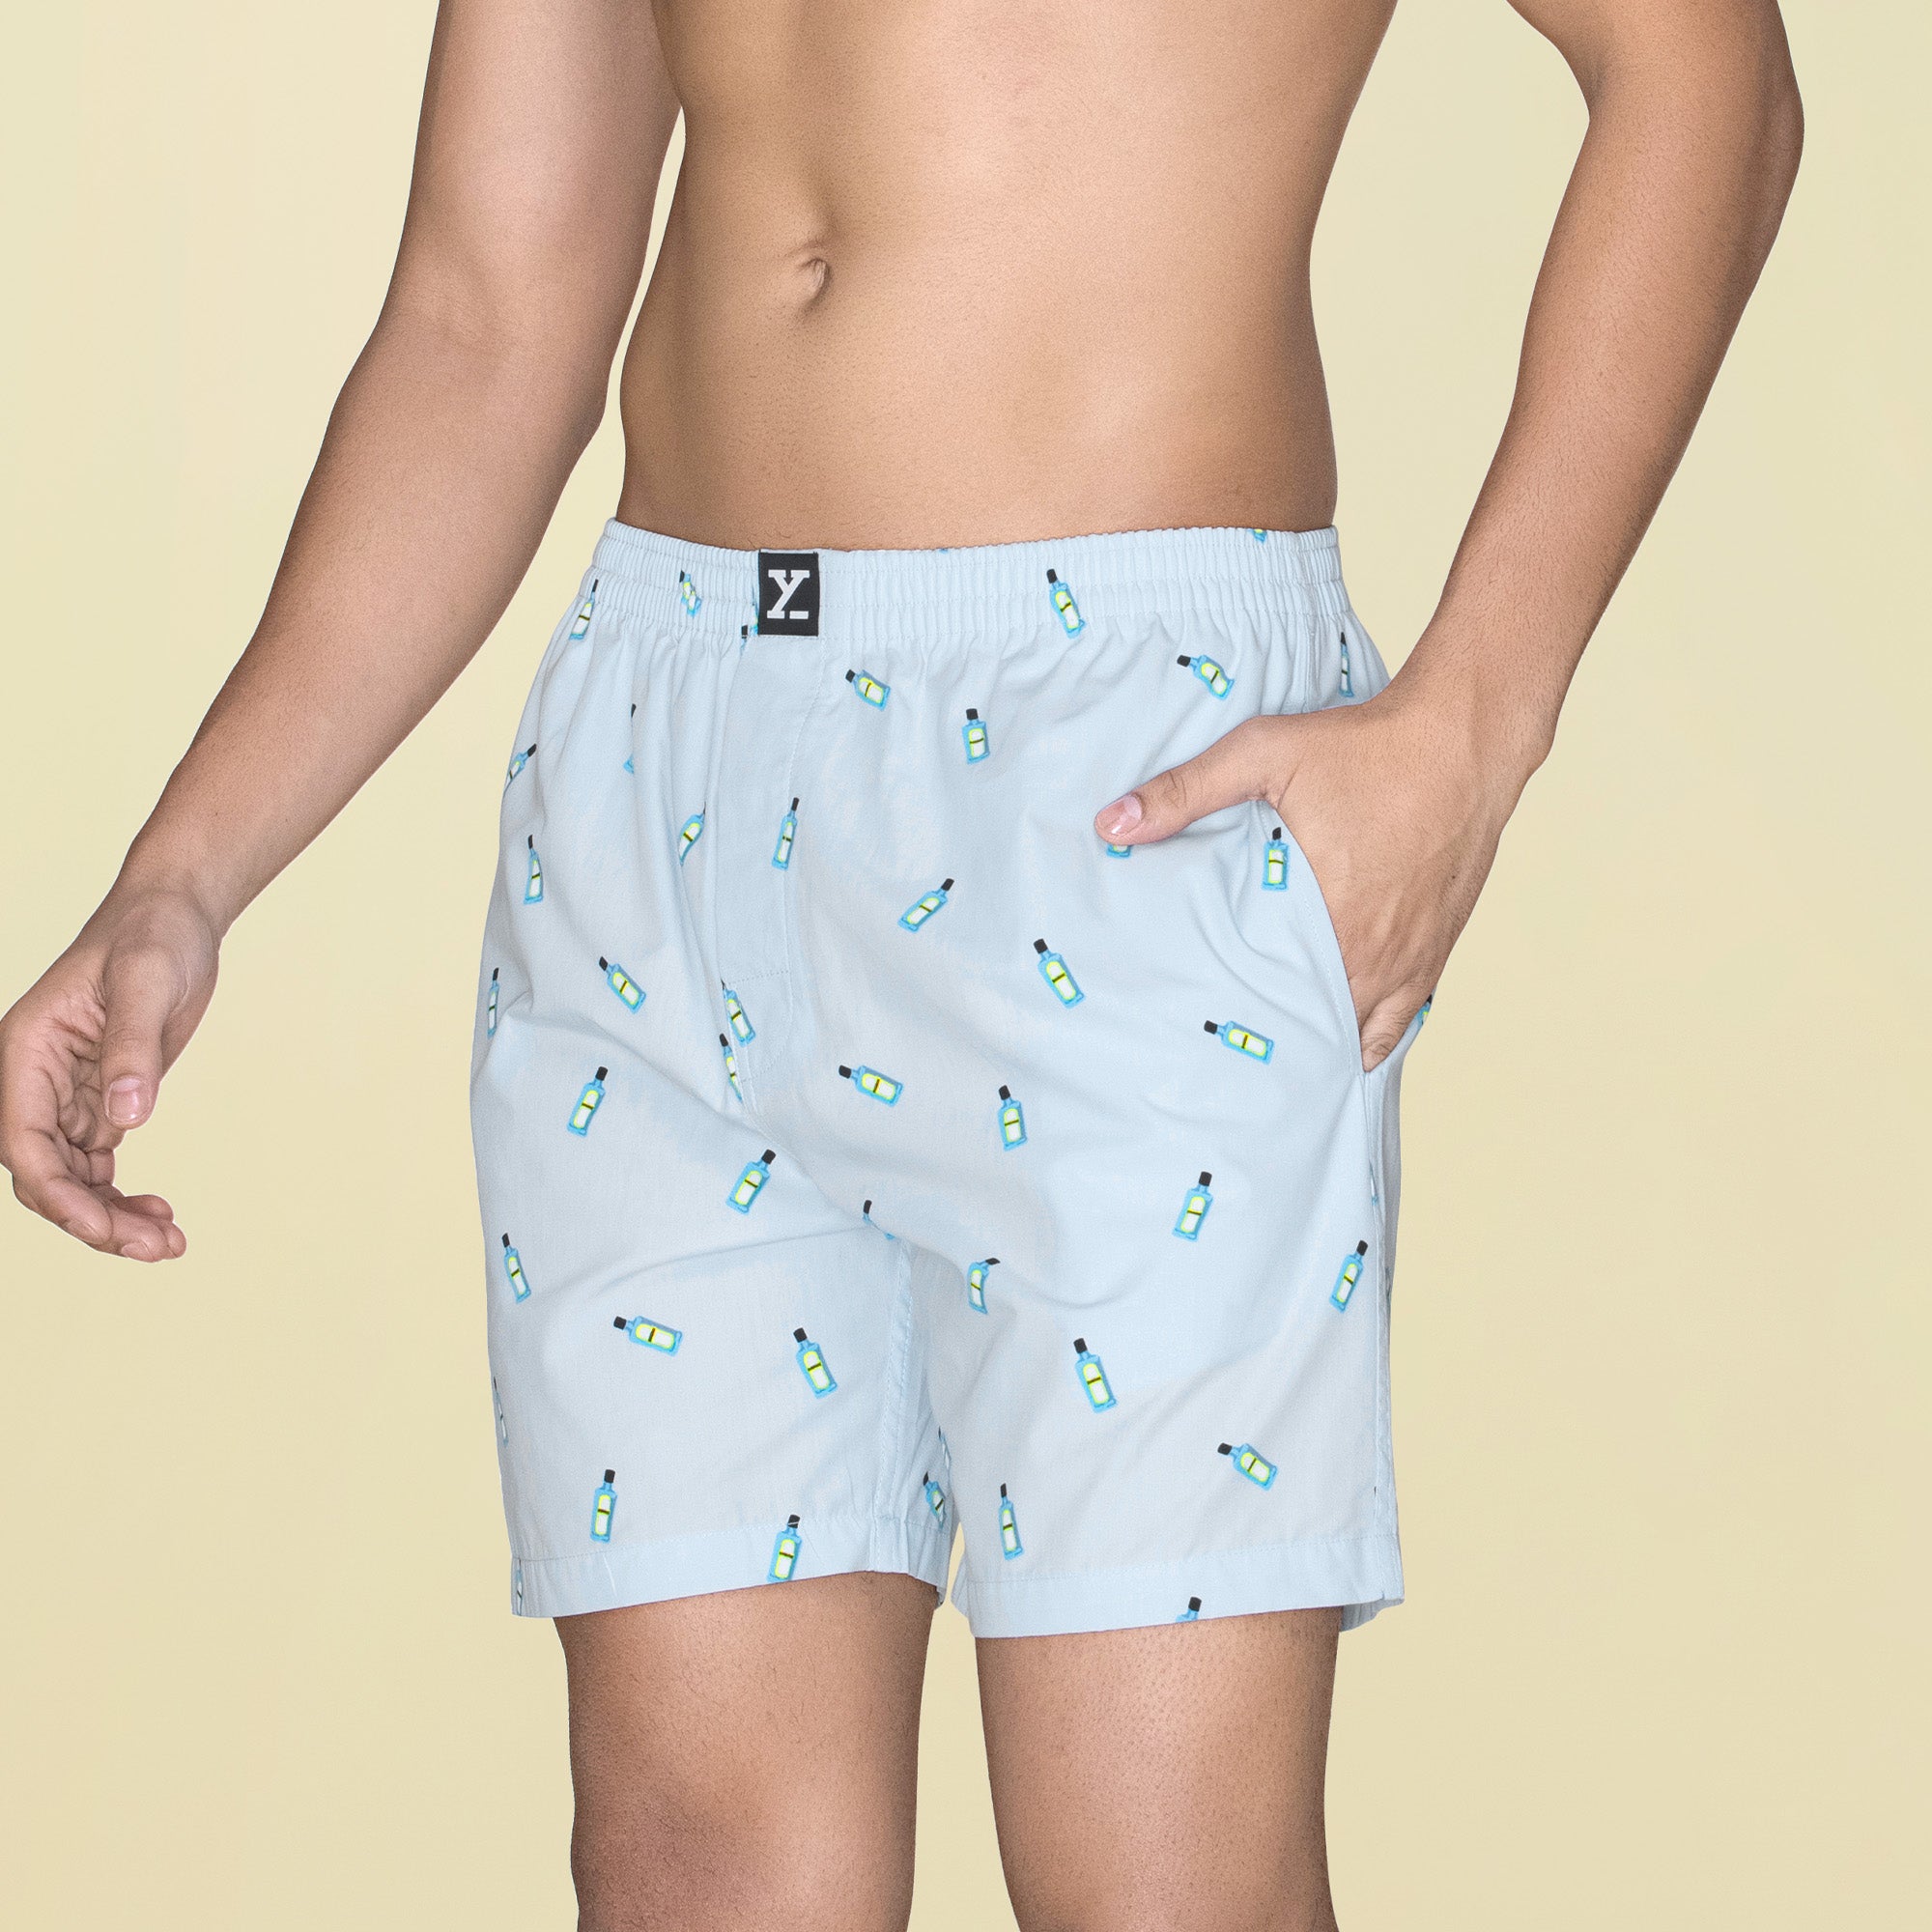 Buy Vintage 1950s Sewing Pattern: Men's Shorts Boxer Shorts, Underwear  Multi-sizes Online in India 